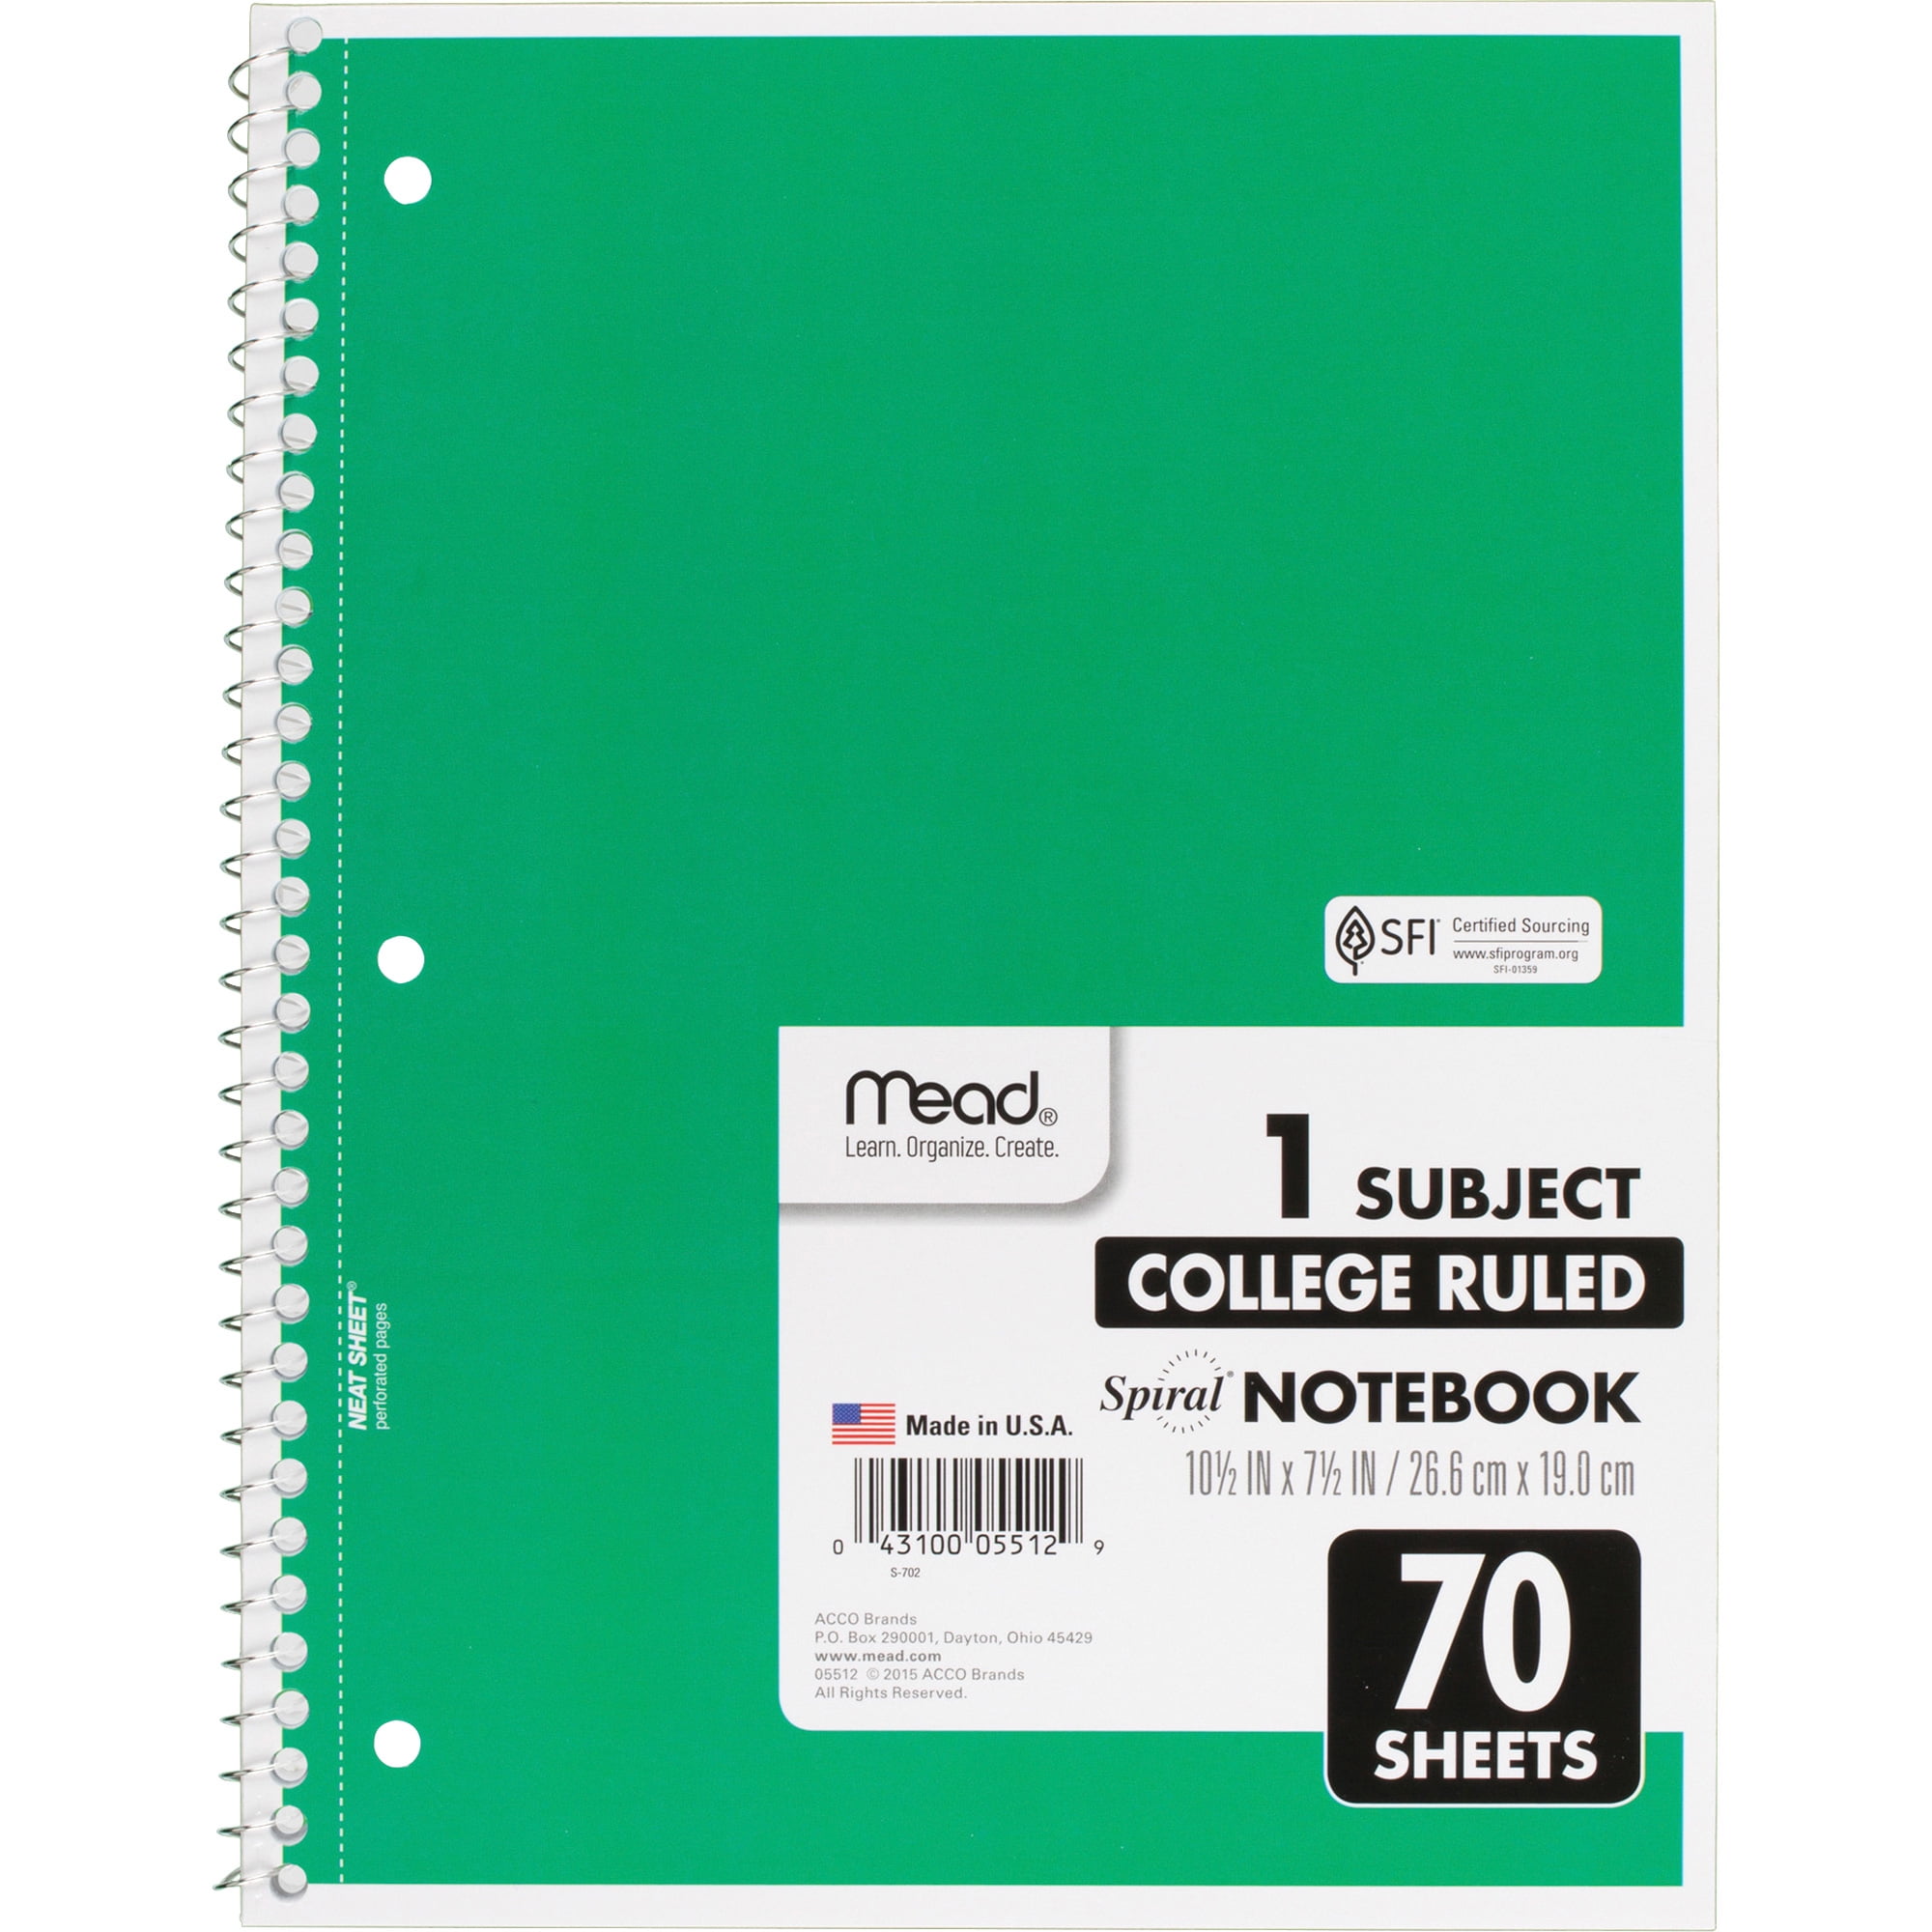 Mead Spiral Notebooks 70 Sheets Assorted Colors 10-1/2 x 7-1/2 1 Subject 12 Pack 73703 College Ruled Paper 